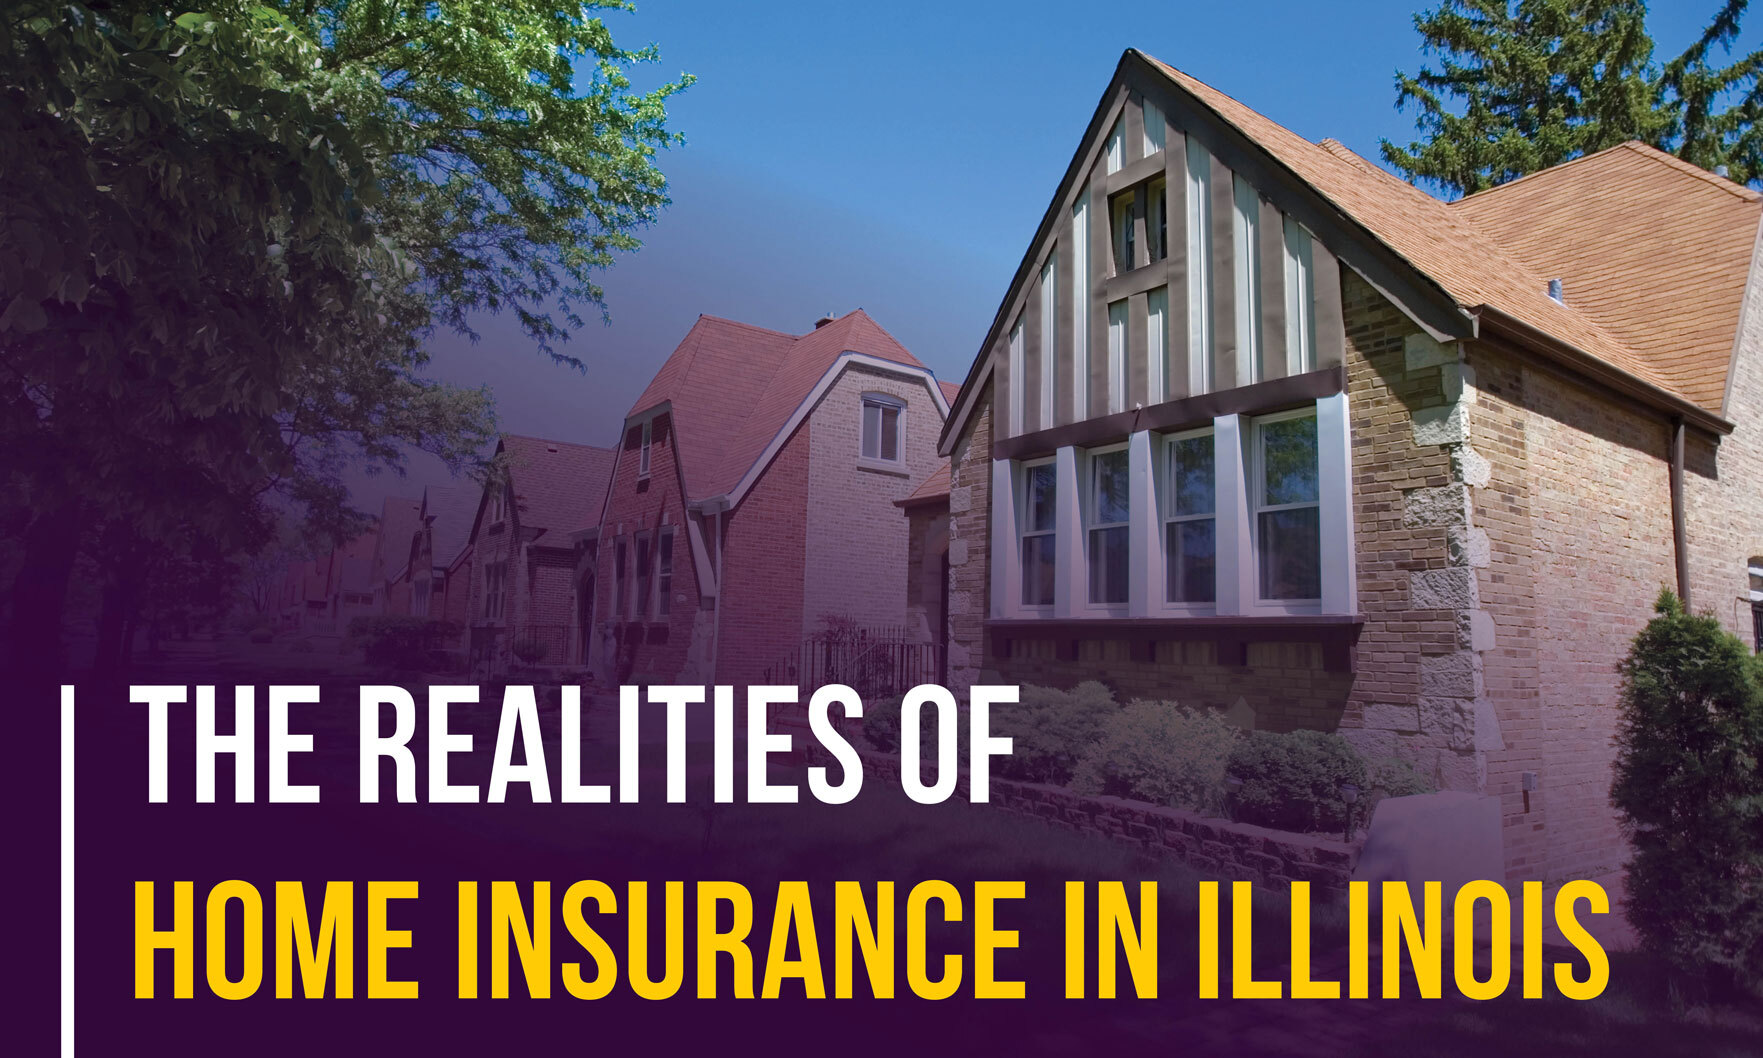 What You Need to Know About Homeowners Insurance in Illinois - Chicago Agent Magazine Partner Content